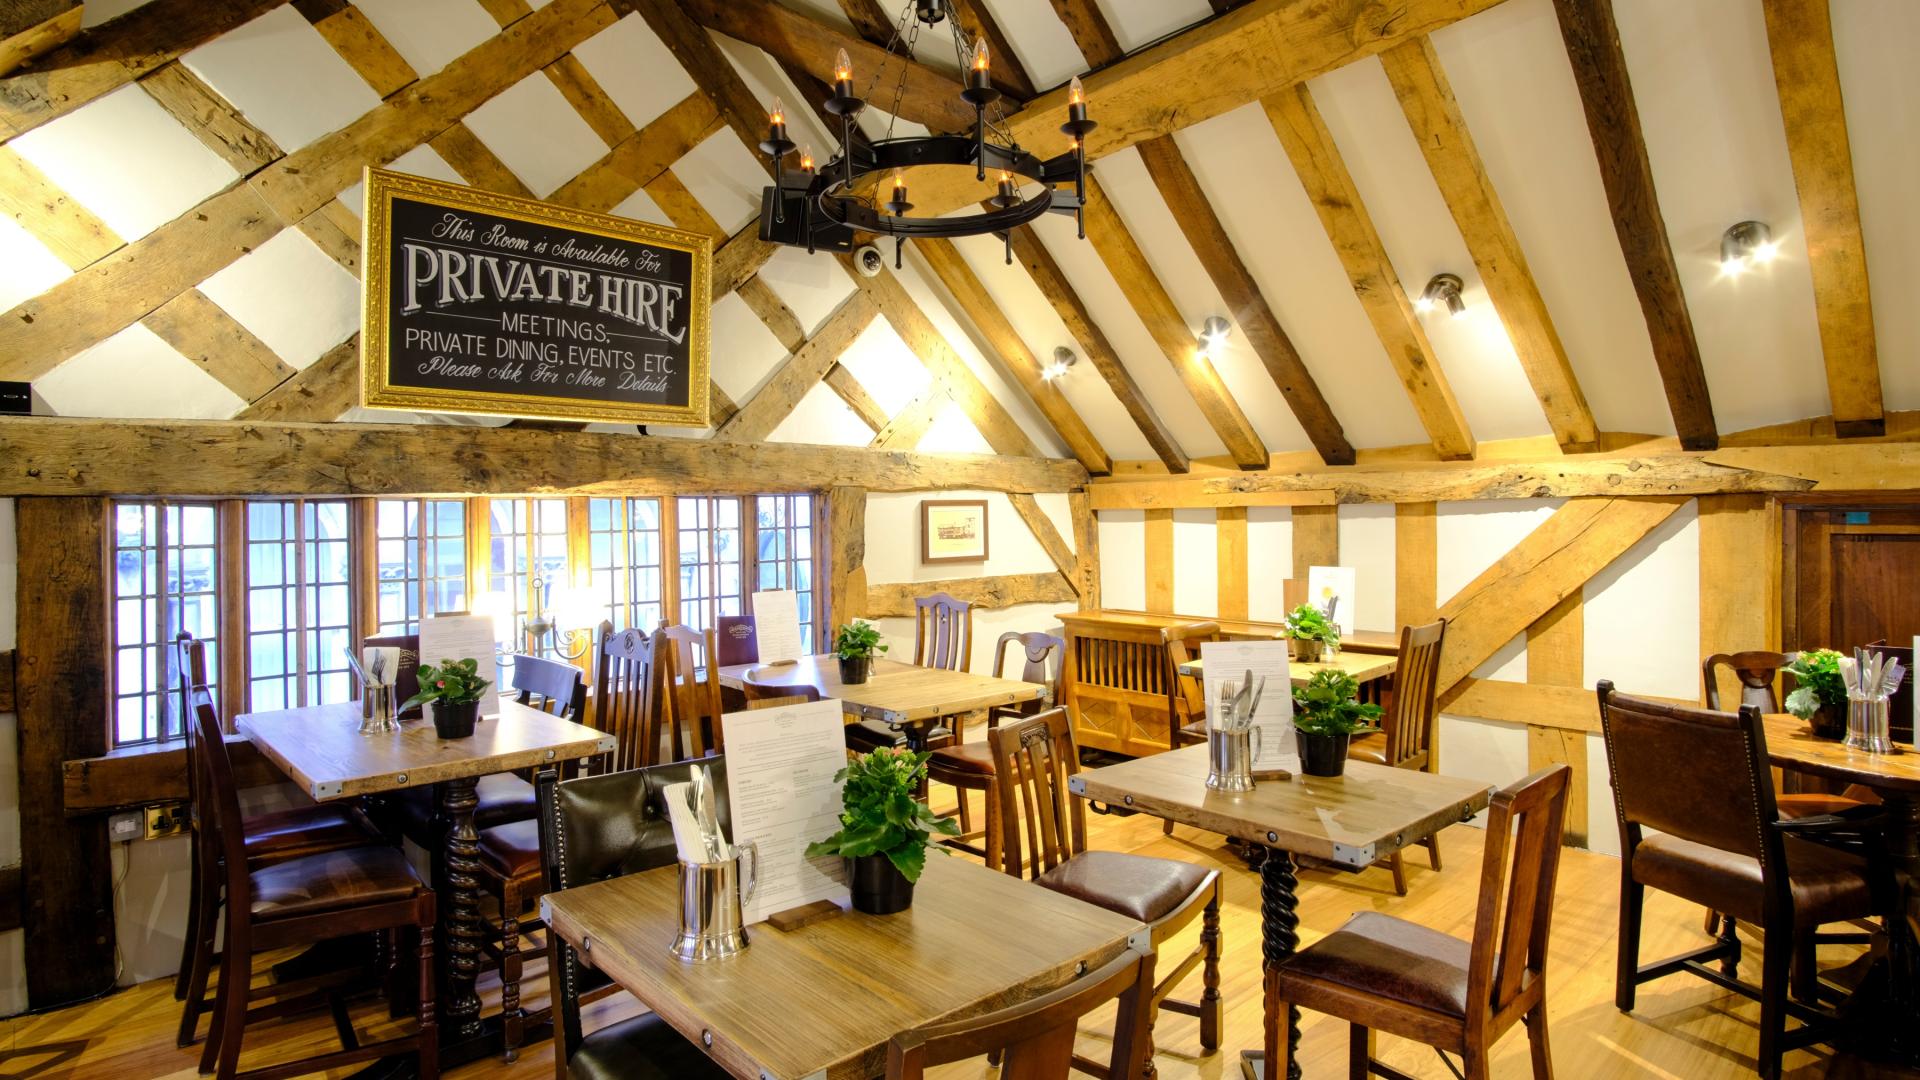 Pubs with Function Rooms for Hire in Manchester